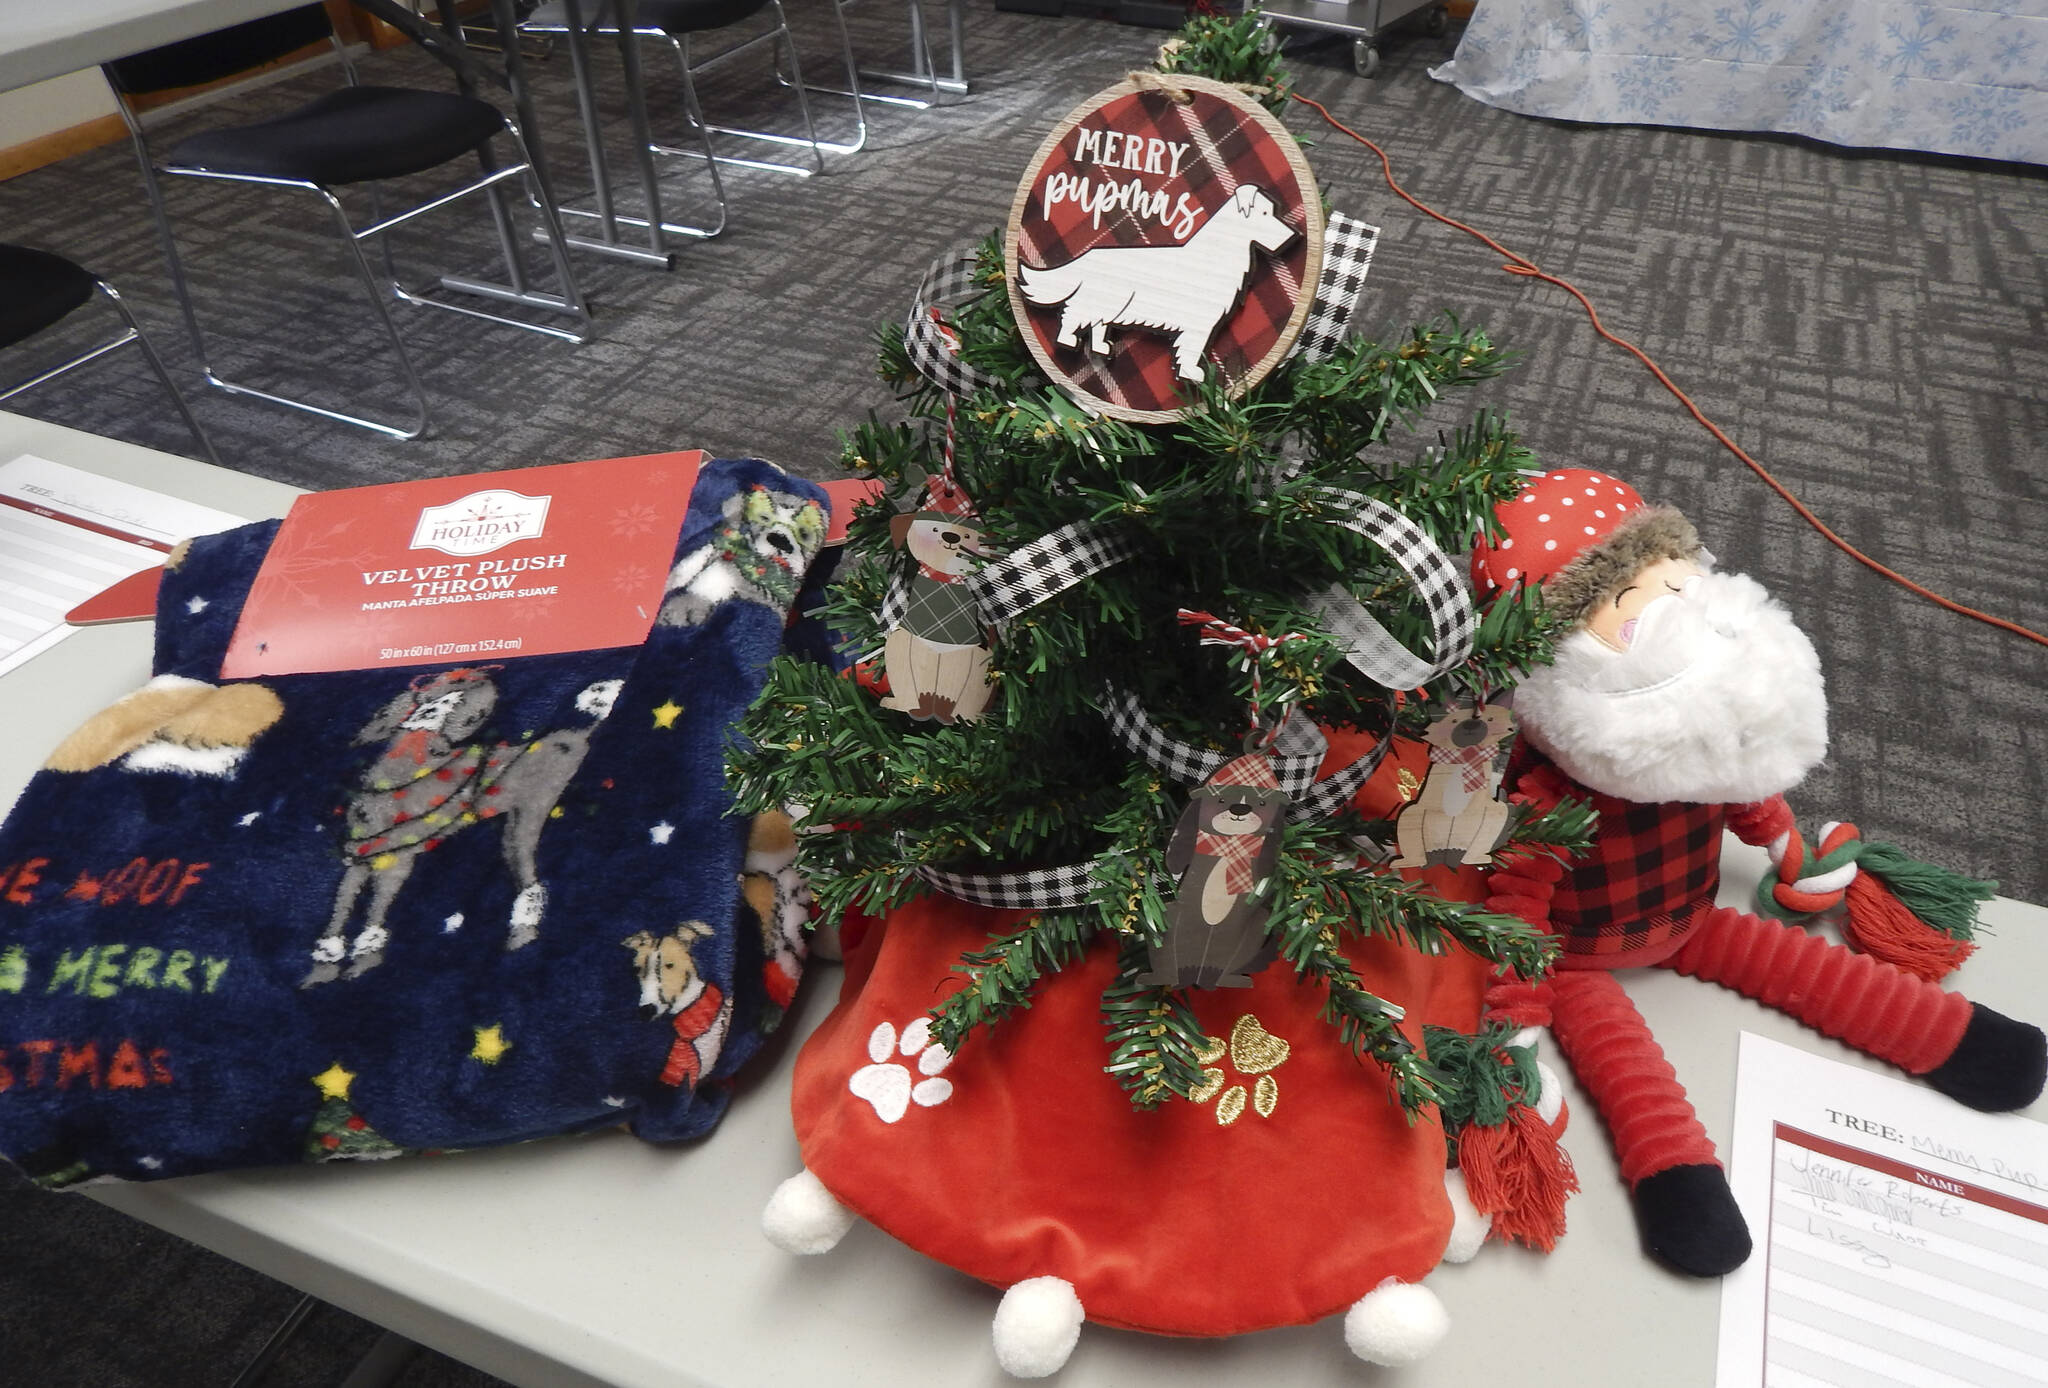 2nd place tree - Healthcare Information Management - “Merry Pup-mas”